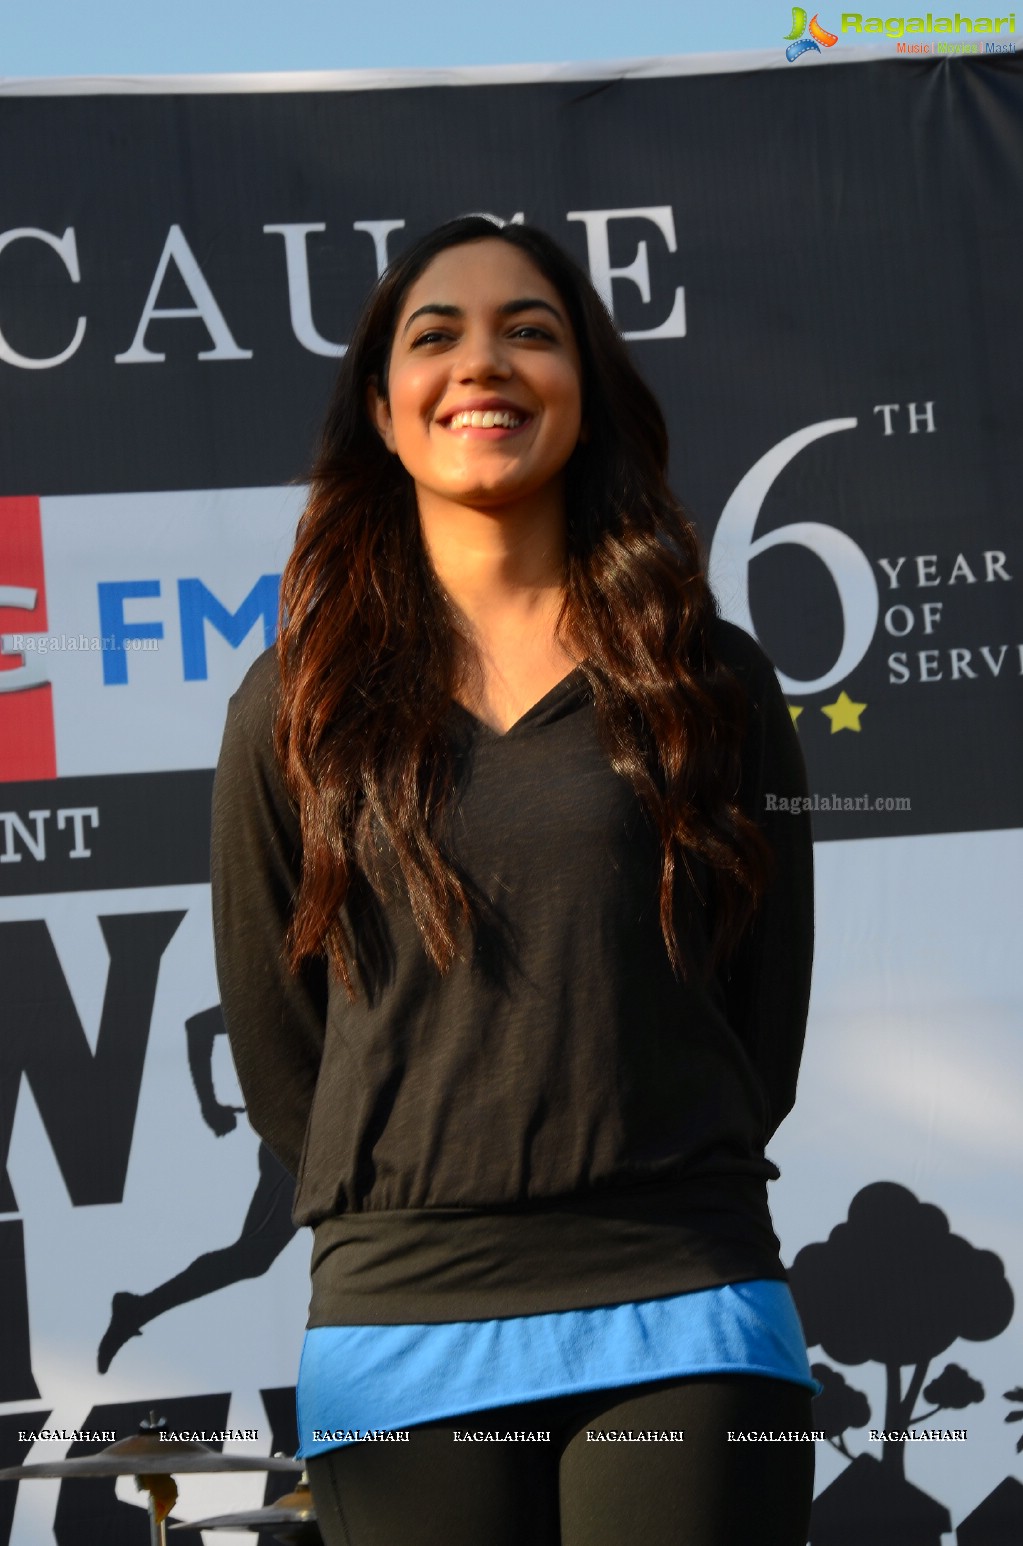 Run For a Cause by Street Cause and 92.7 BIG FM, Hyderabad